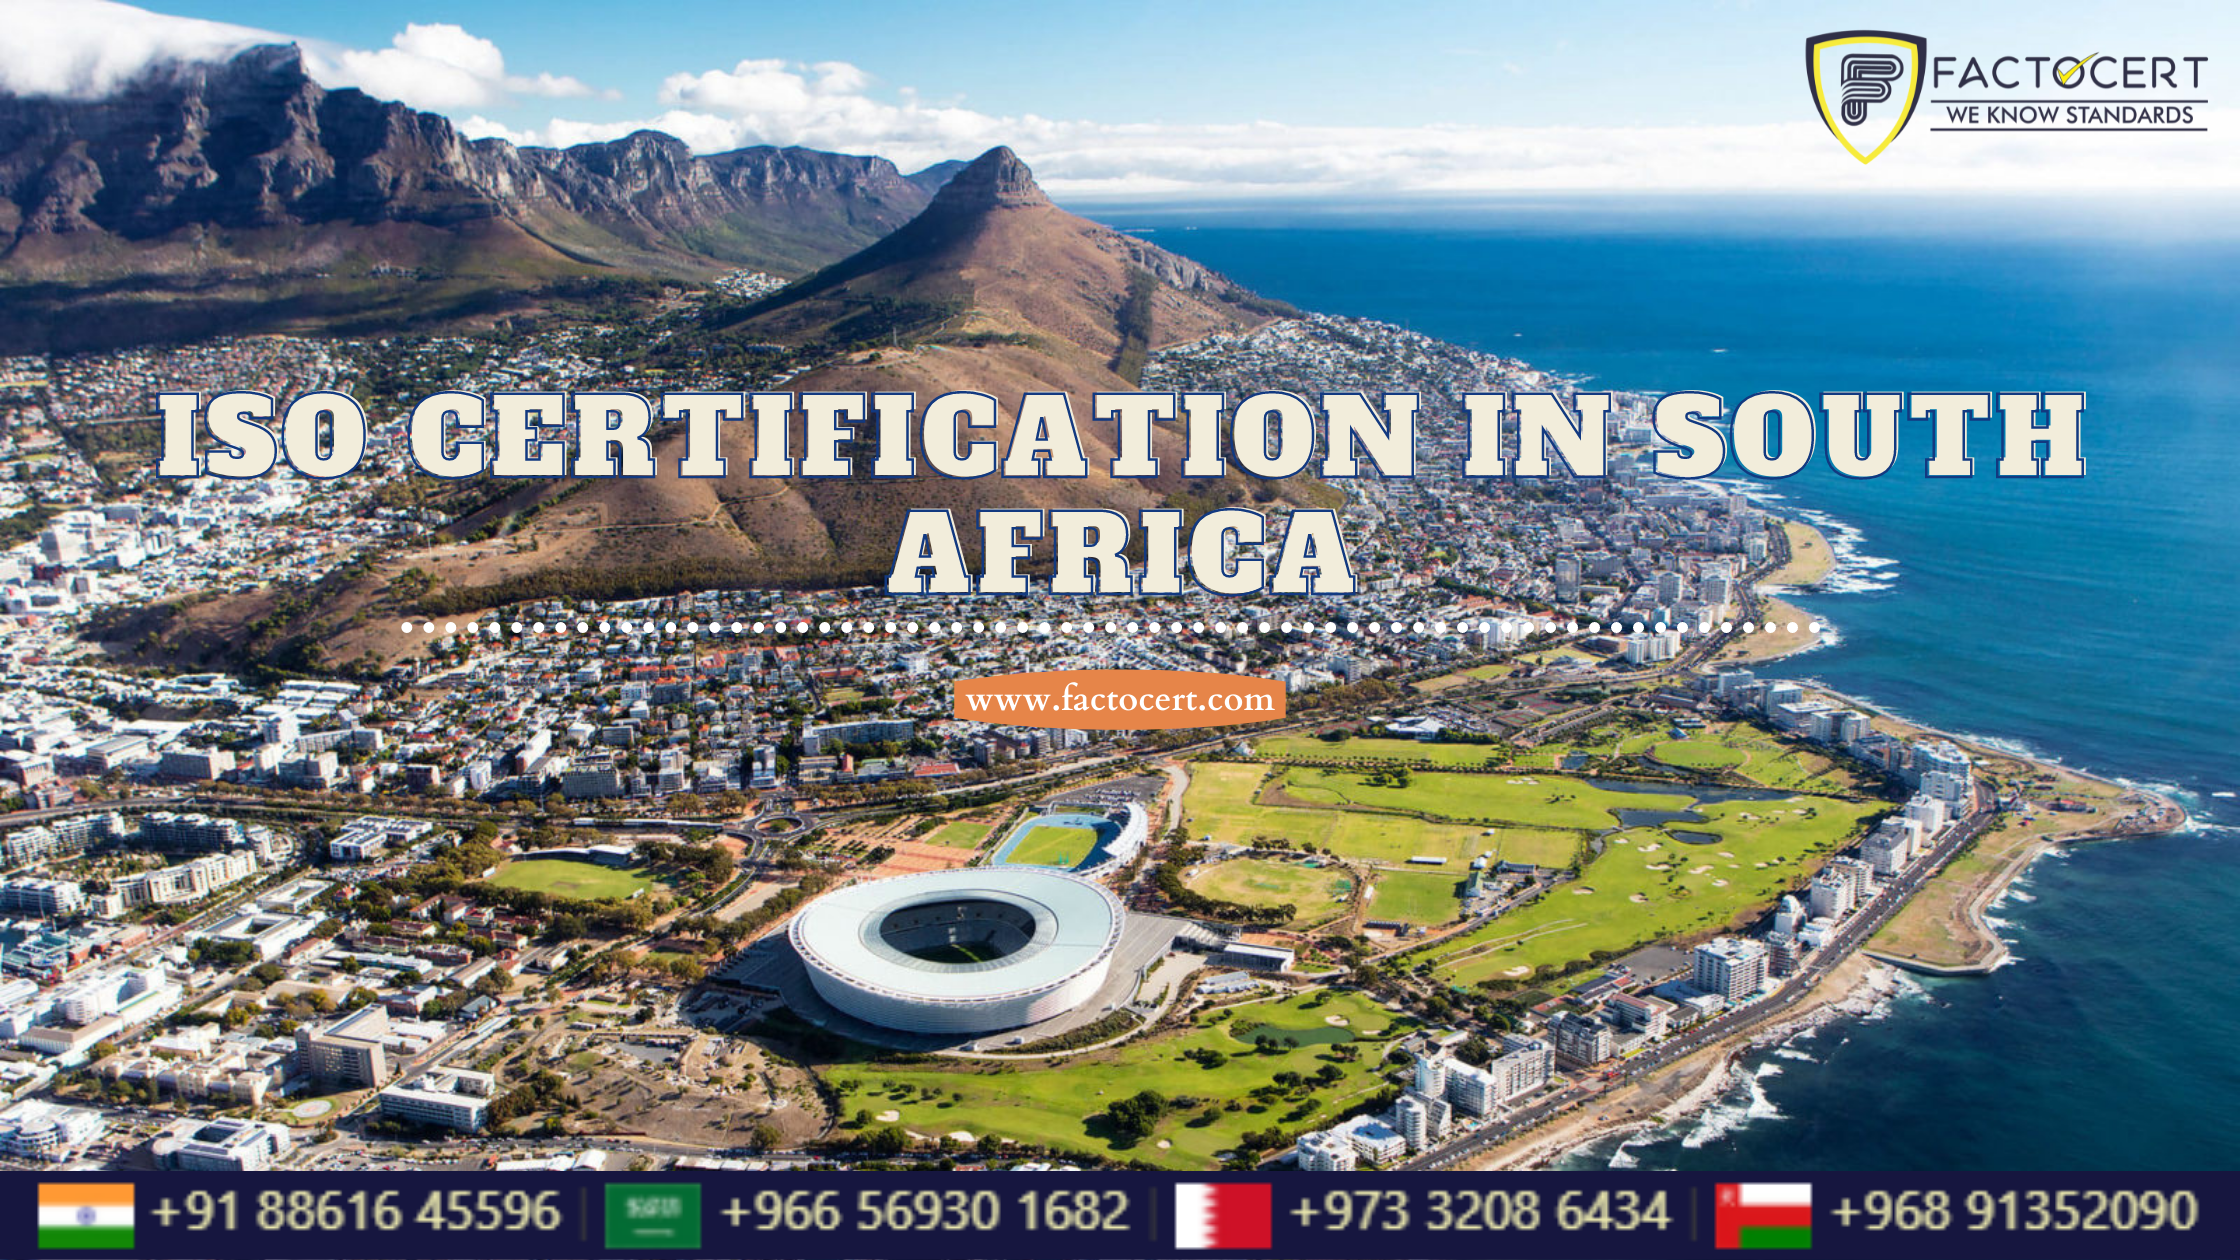 Factocert served the best ISO Certification in South Africa at a better cost.